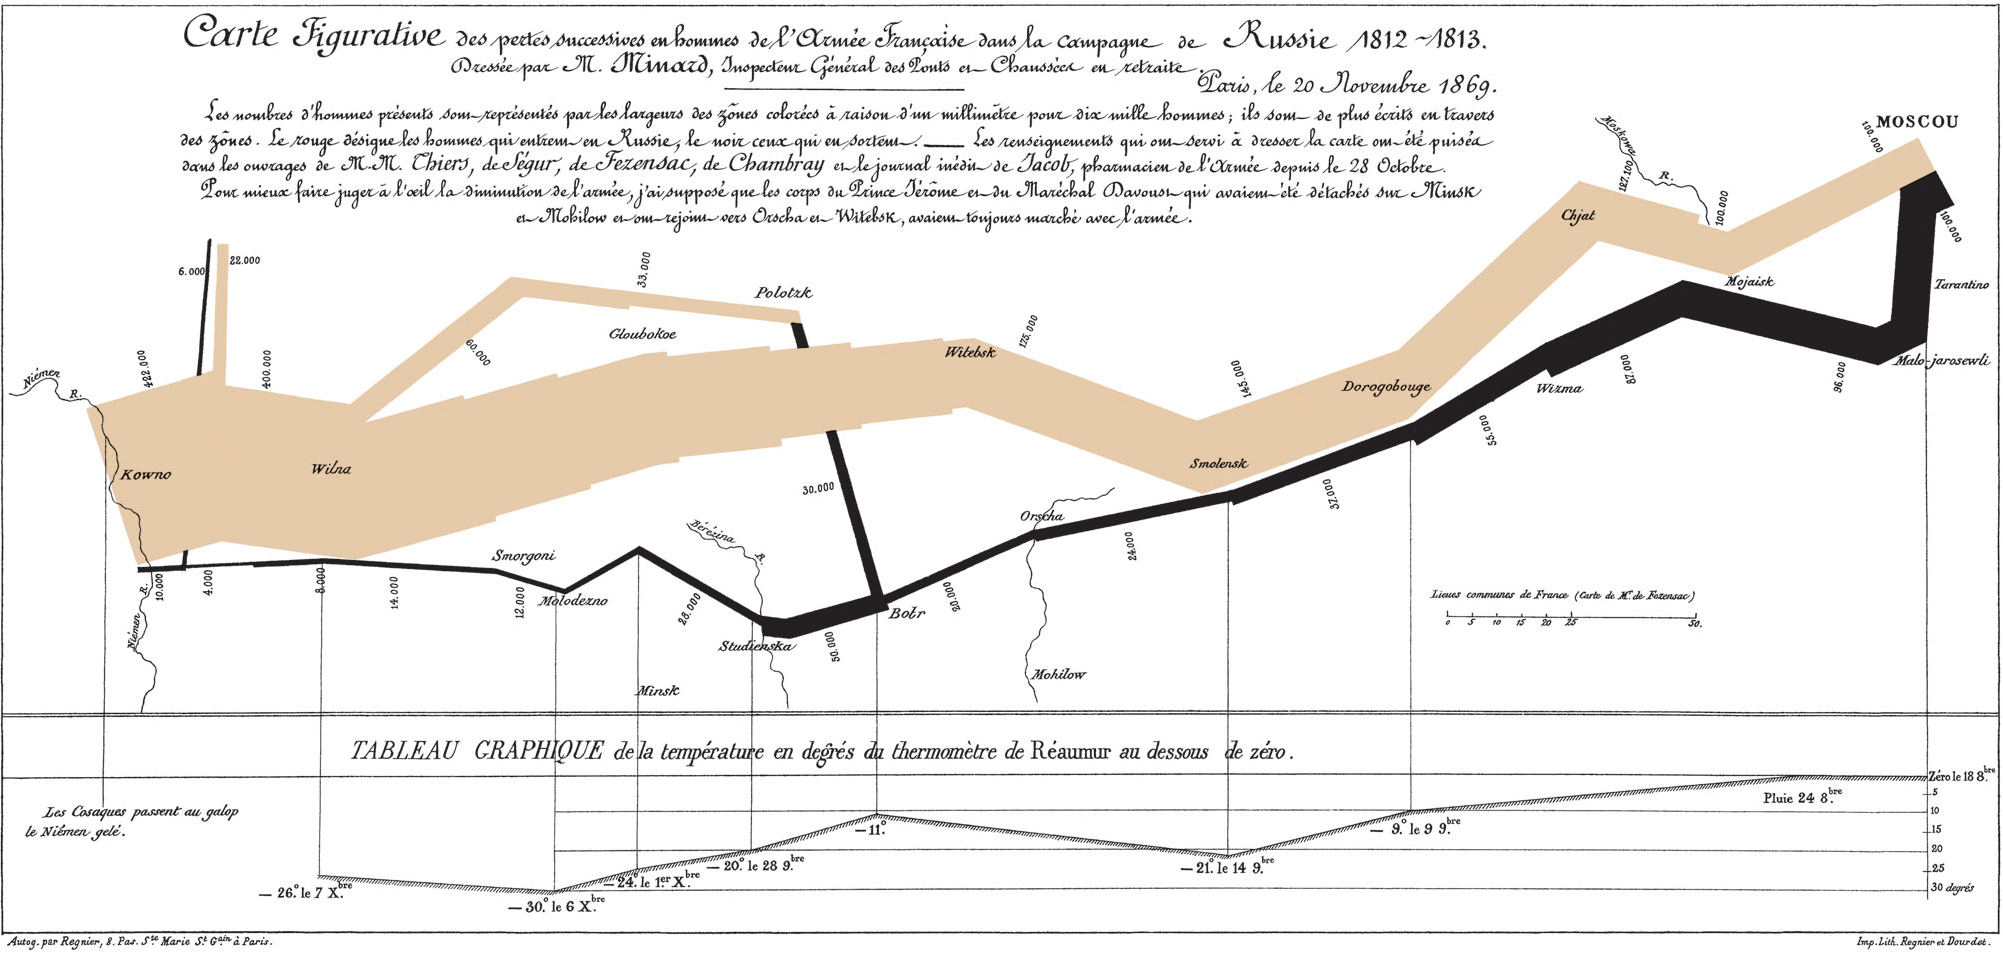 Diagram showing the advance toward and retreat from Moscow by Napoleon's army during the Russian campaign of 1812-1813, from the Neman River east to Moscow. The advance is shown as a painted tan line, and the retreat with a painted black line. The size of the army at each point is shown by the thickness of the painted line. Two instances where the army was split are shown by branches in the painted line. The line thickness is reduced by nearly 75% by the time it reaches Moscow, and is reduced by more than an order of magnitude by the time the retreat returns to the Neman River